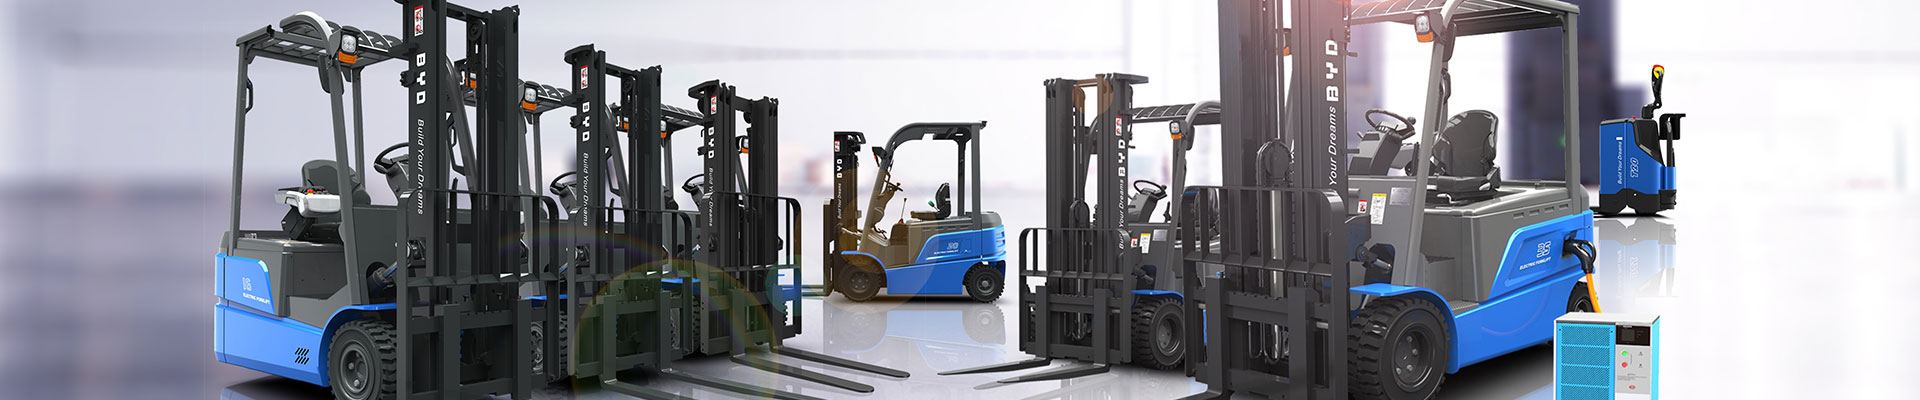 Group of BYD electric forklifts